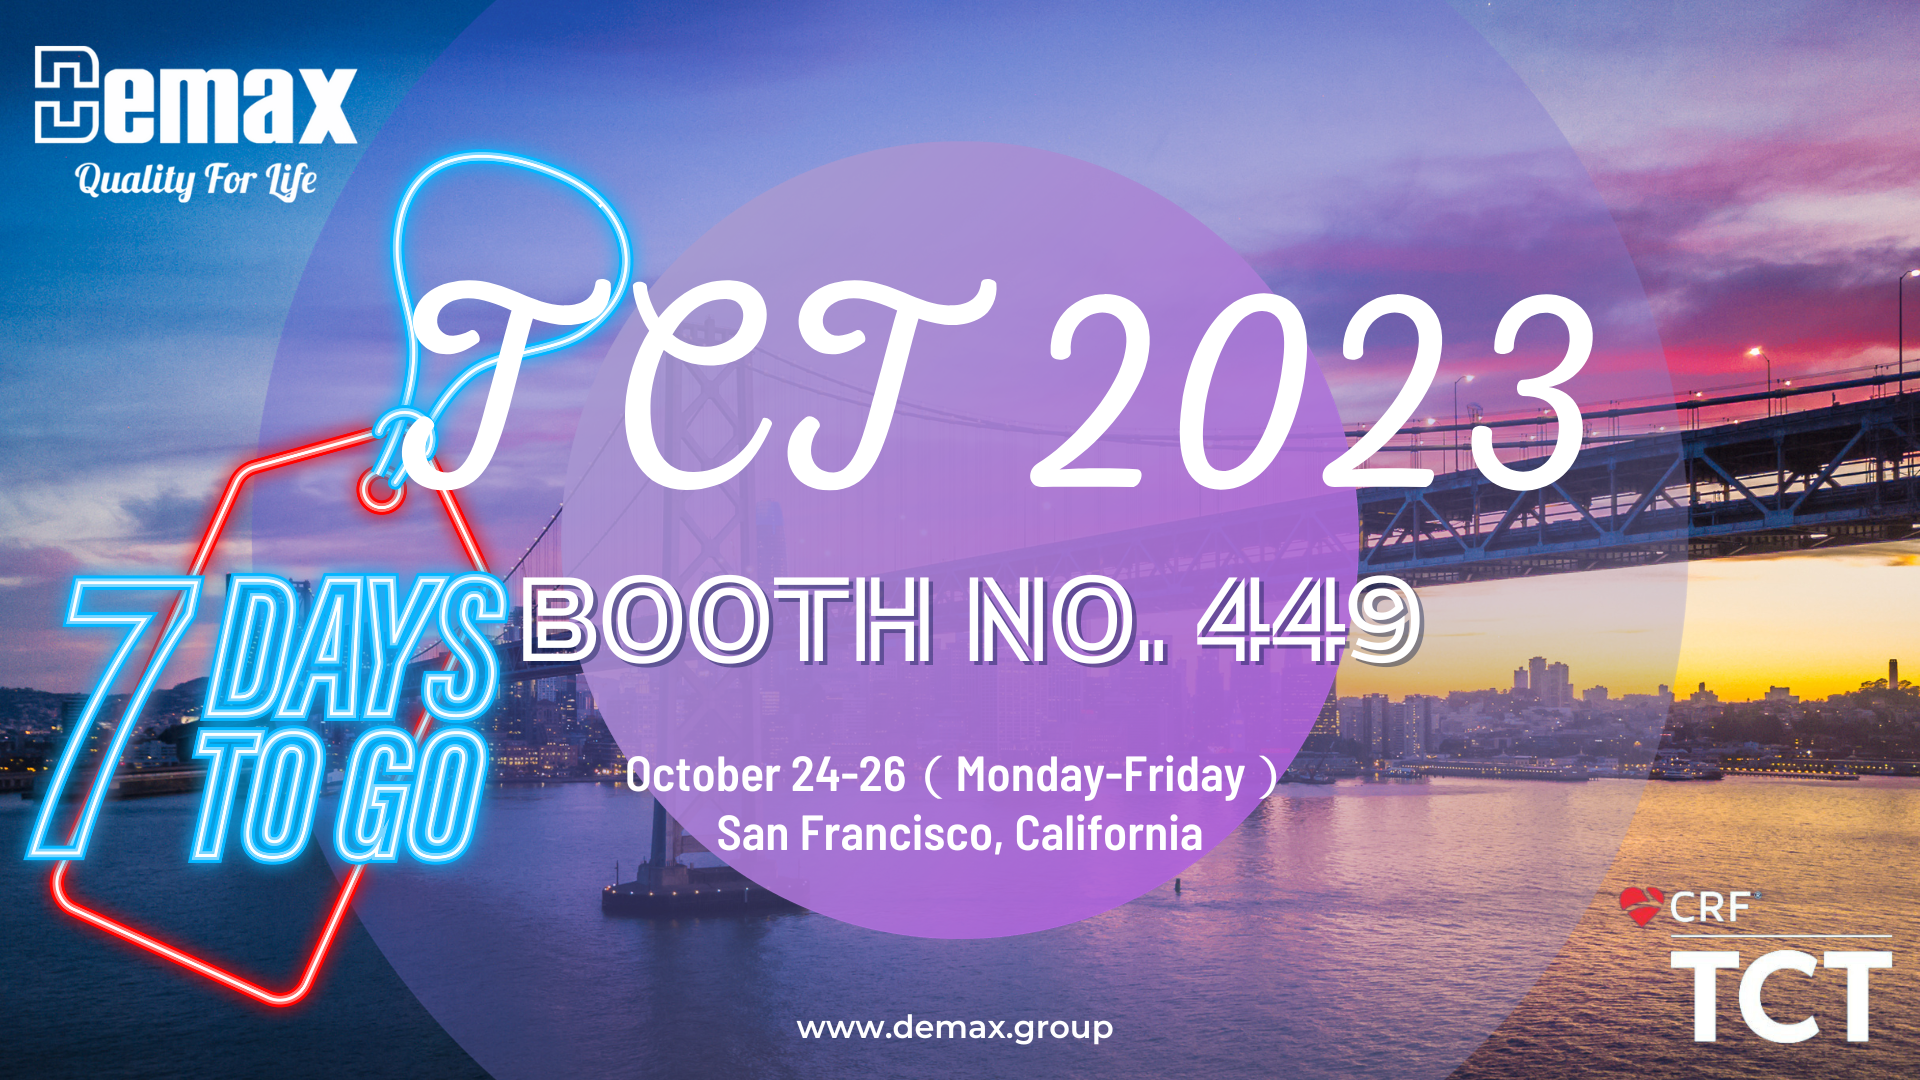 Countdown to 7 days! 2023TCT welcomes you to visit Demax booth 449, participate in exciting on-site activities, and win exquisite peripheral gifts.